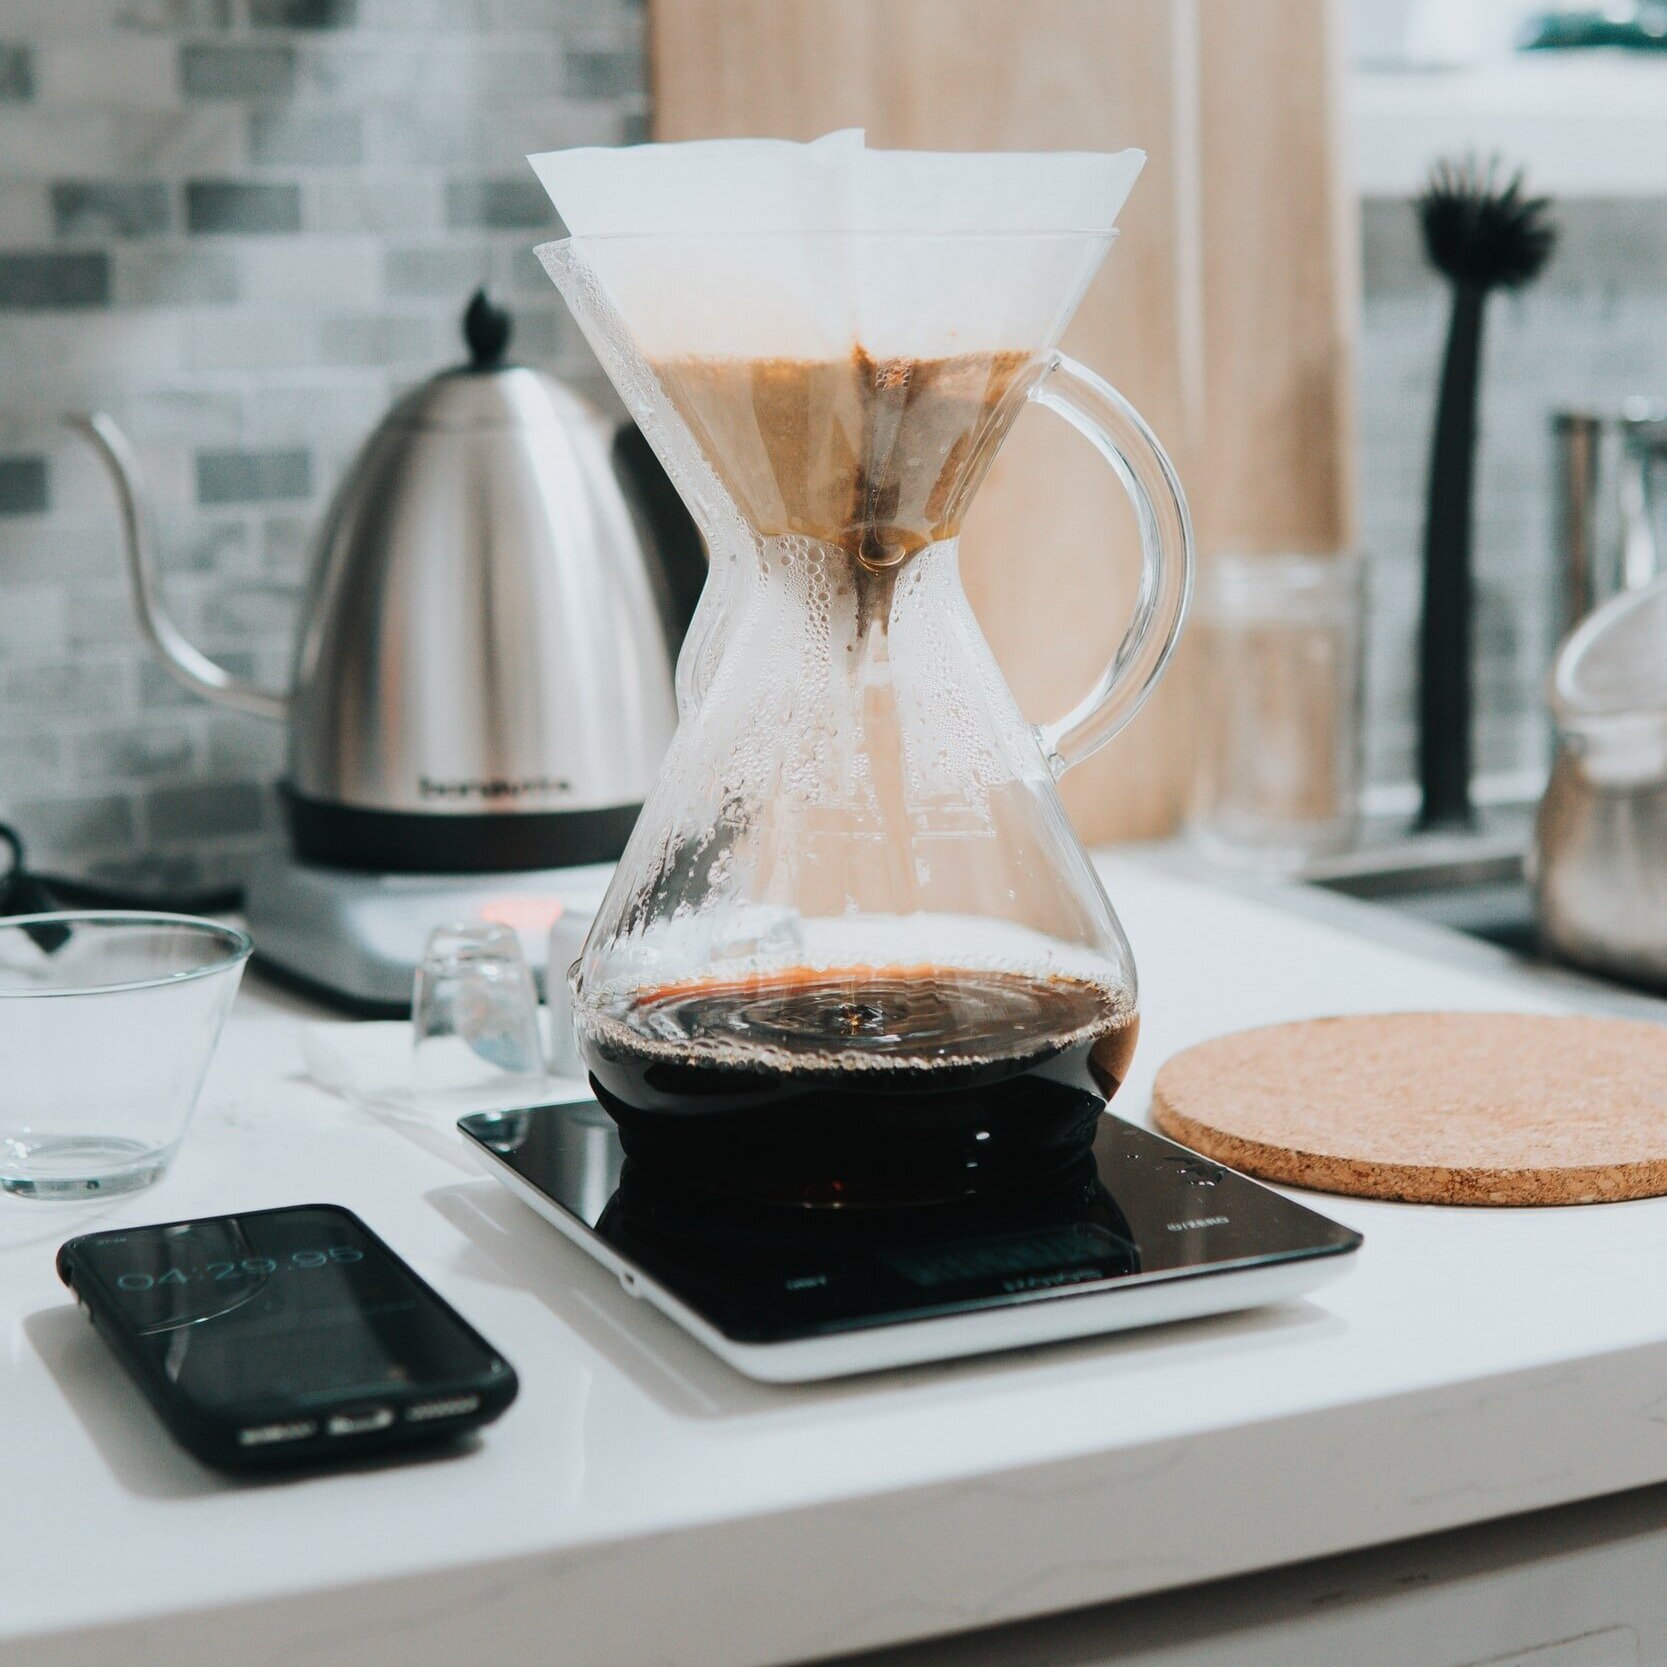 Coffee Scales: Why Using One Will Make Your Coffee Better — Espressotec  Sales & Service